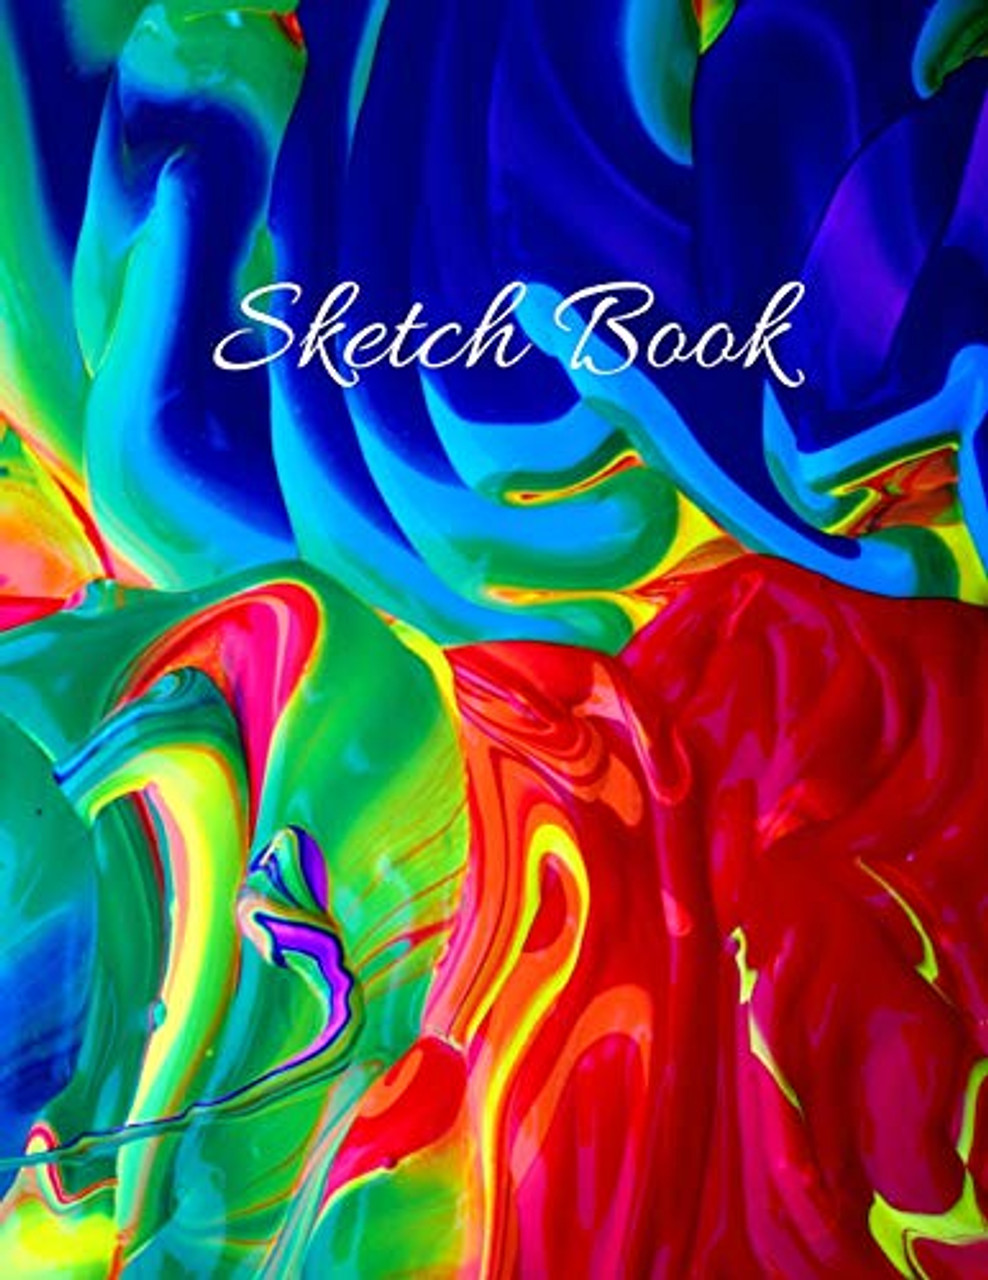 Sketch Book: Large Artistic Creative Colorful Notebook for Drawing